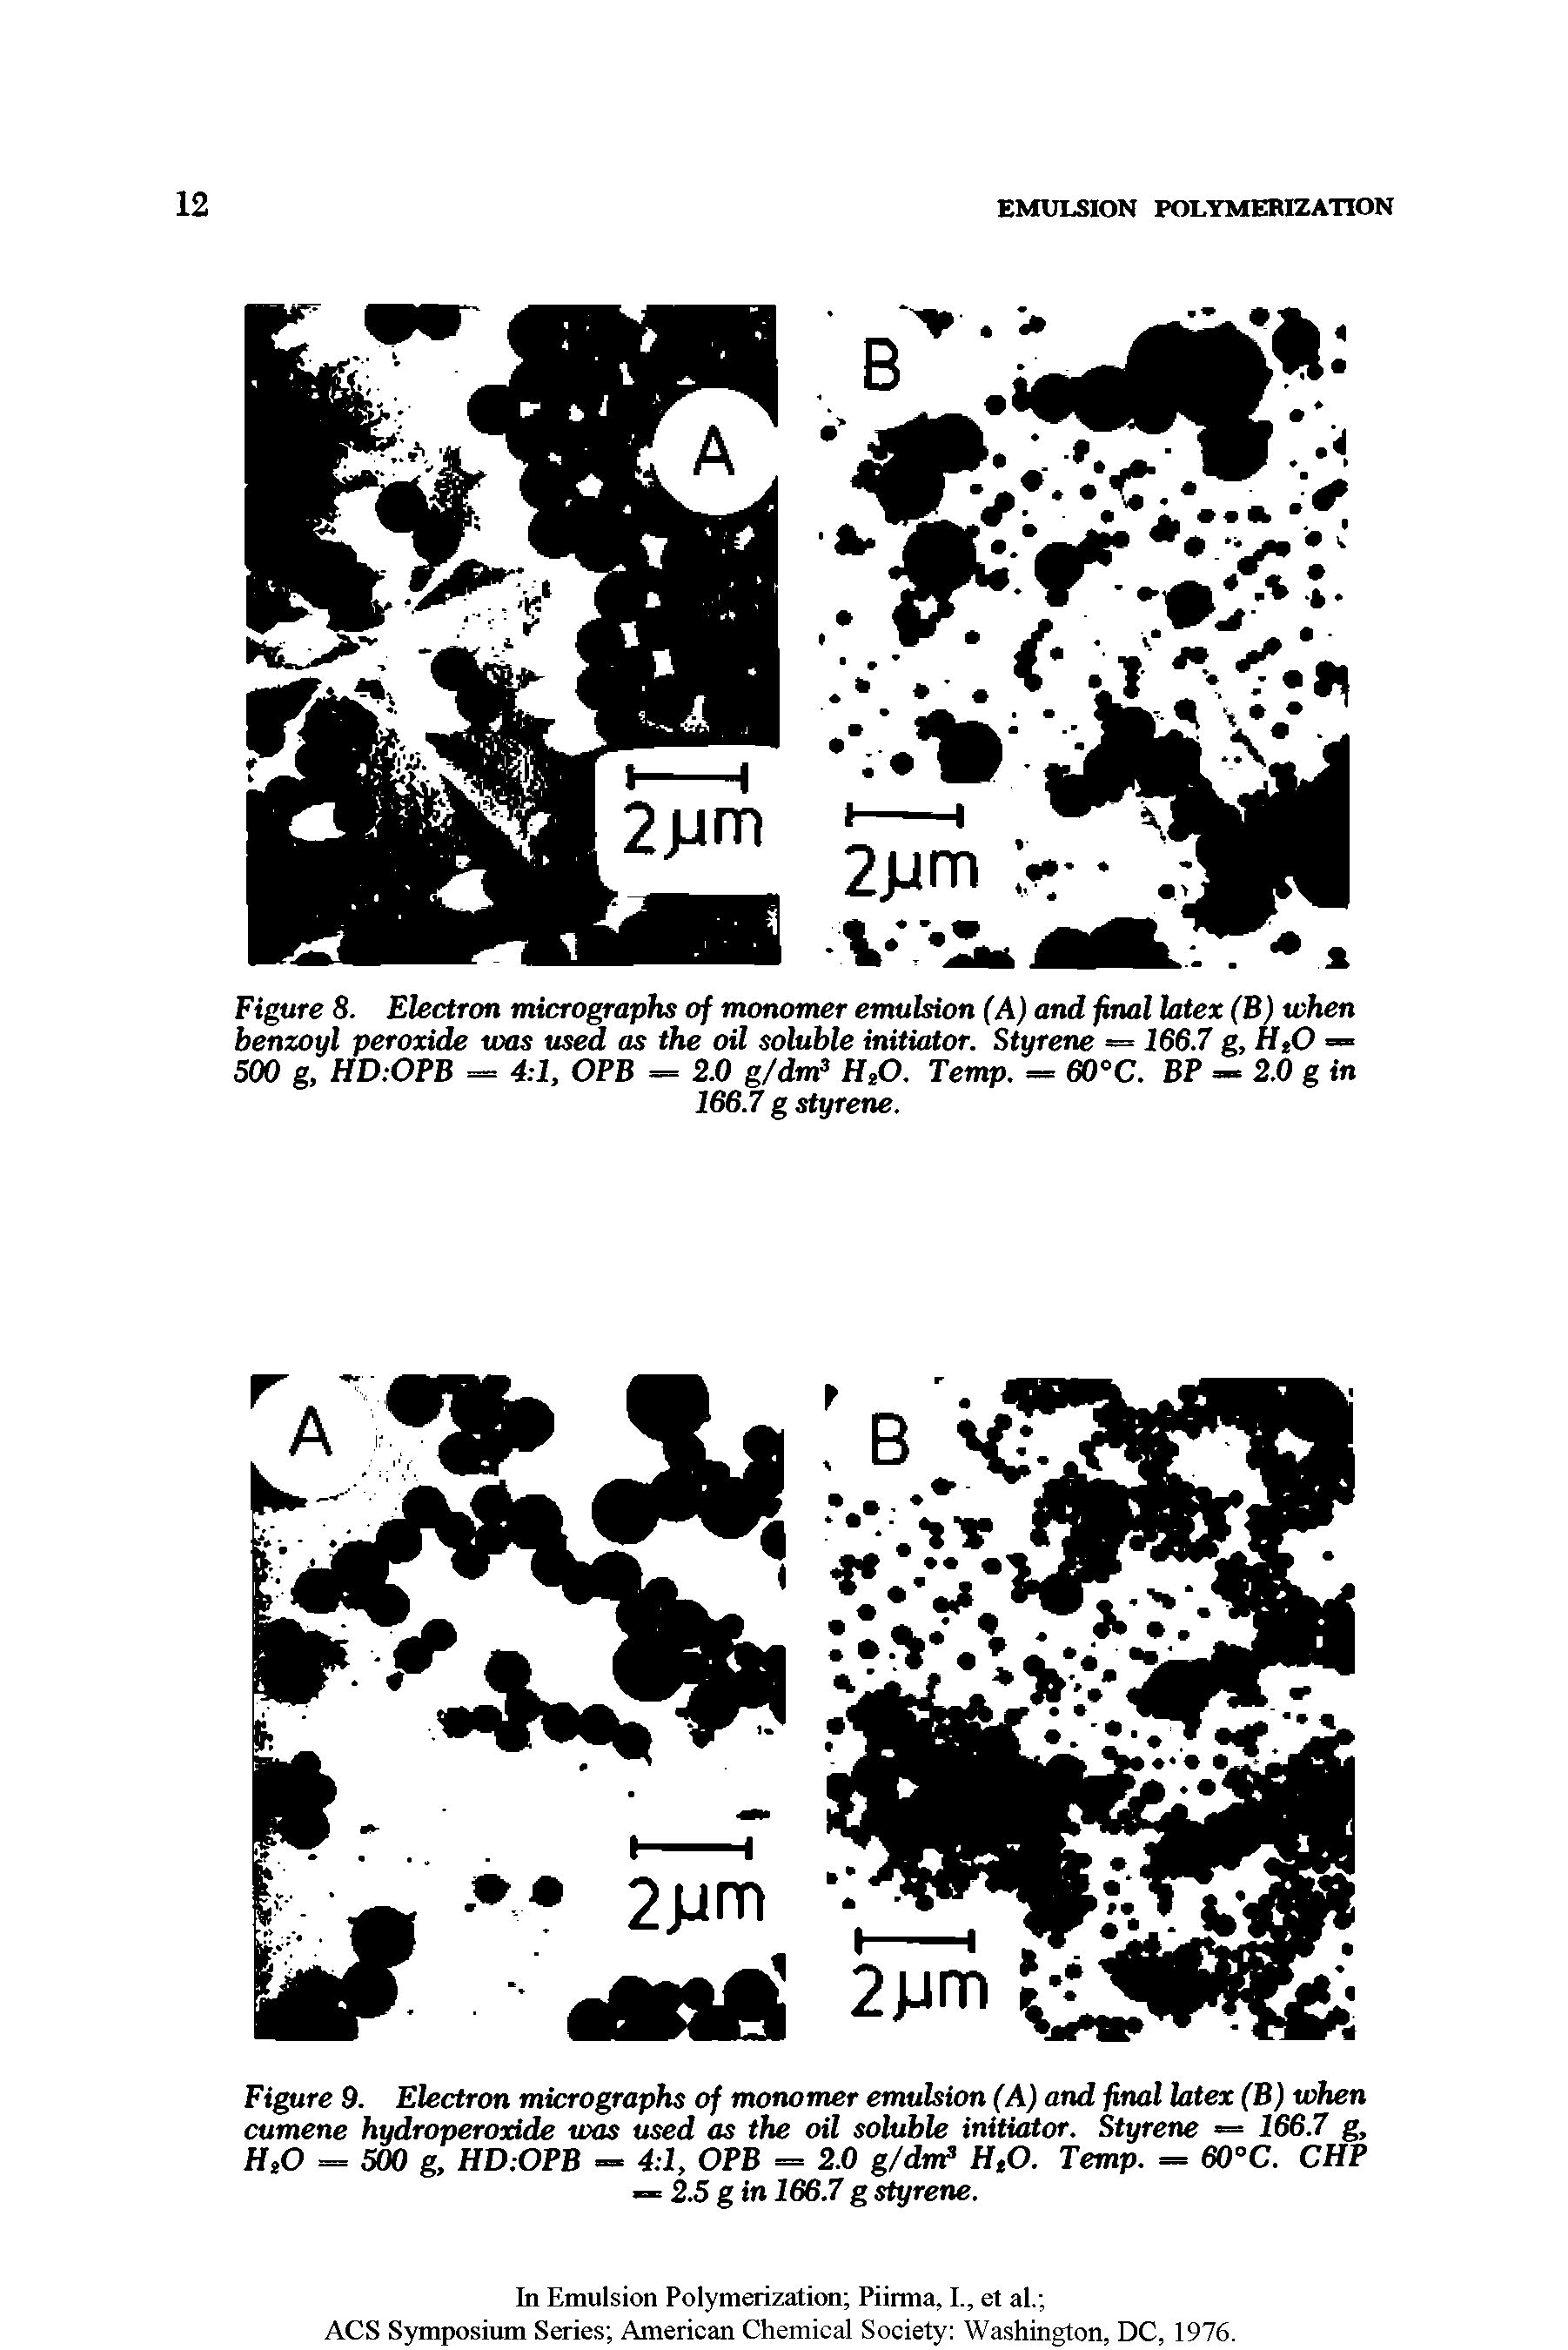 Figure 8. Electron micrographs of monomer emulsion (A) and final latex (B) when benzoyl peroxide was used as the oil soluble initiator. Styrene = 166.7 g, HtO — 500 g, HD-.OVB == 4 1, OPB = 2.0 g/drrd H O. Temp. = 60°C. BP =- 2.0 g in...